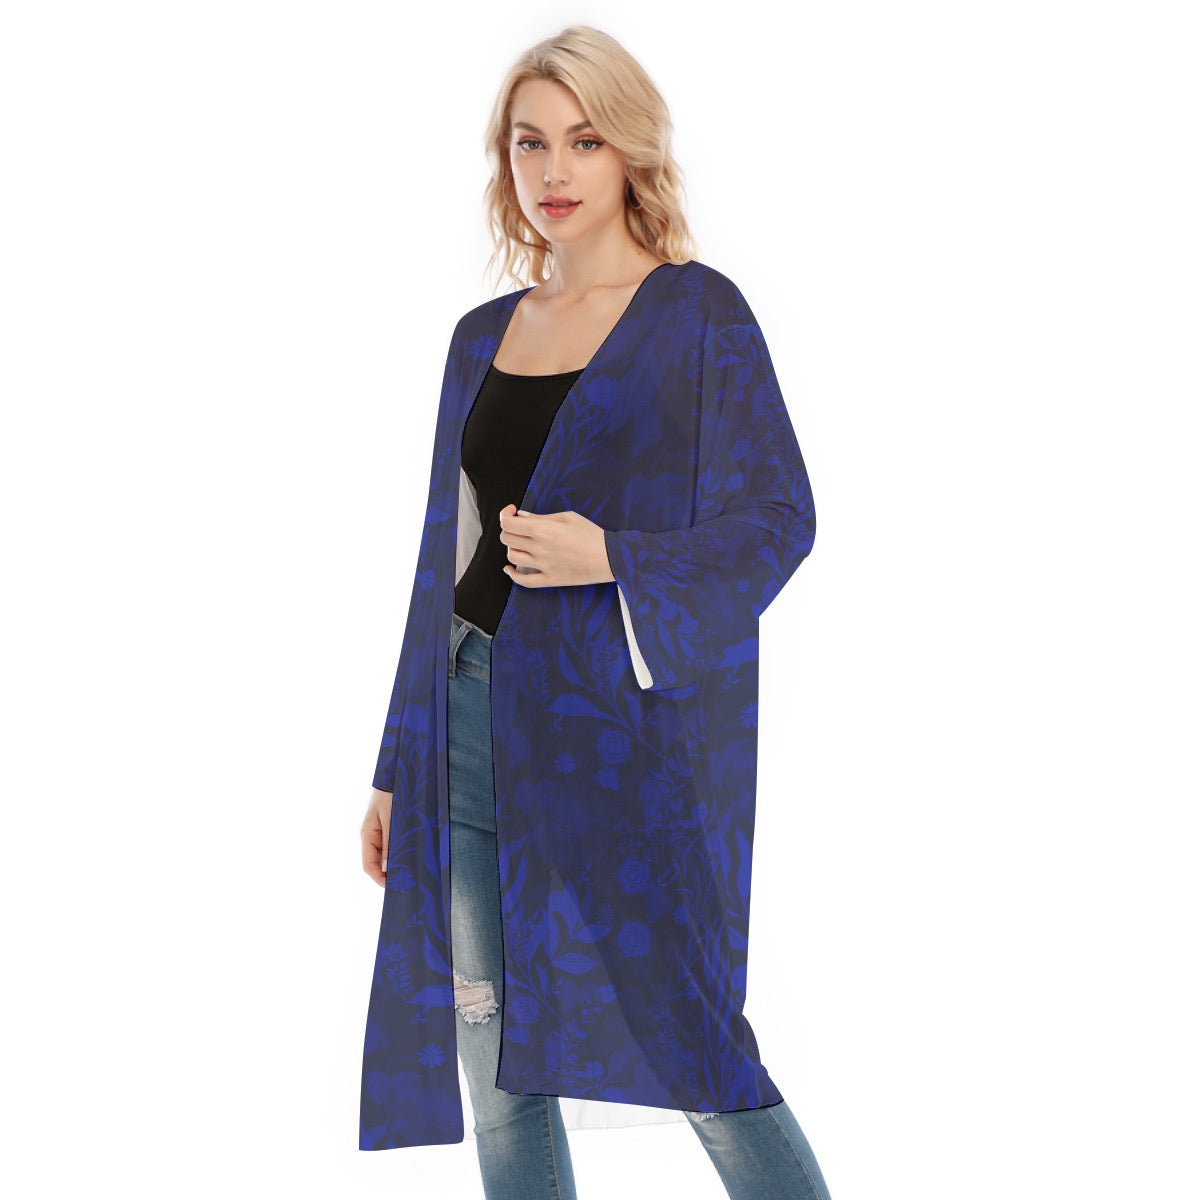 Caracas Collection Blue Long Sleeve Mesh Cardigan. Mesh Kimono. Cover up. Design hand-painted by the Designer Maria Alejandra Echenique